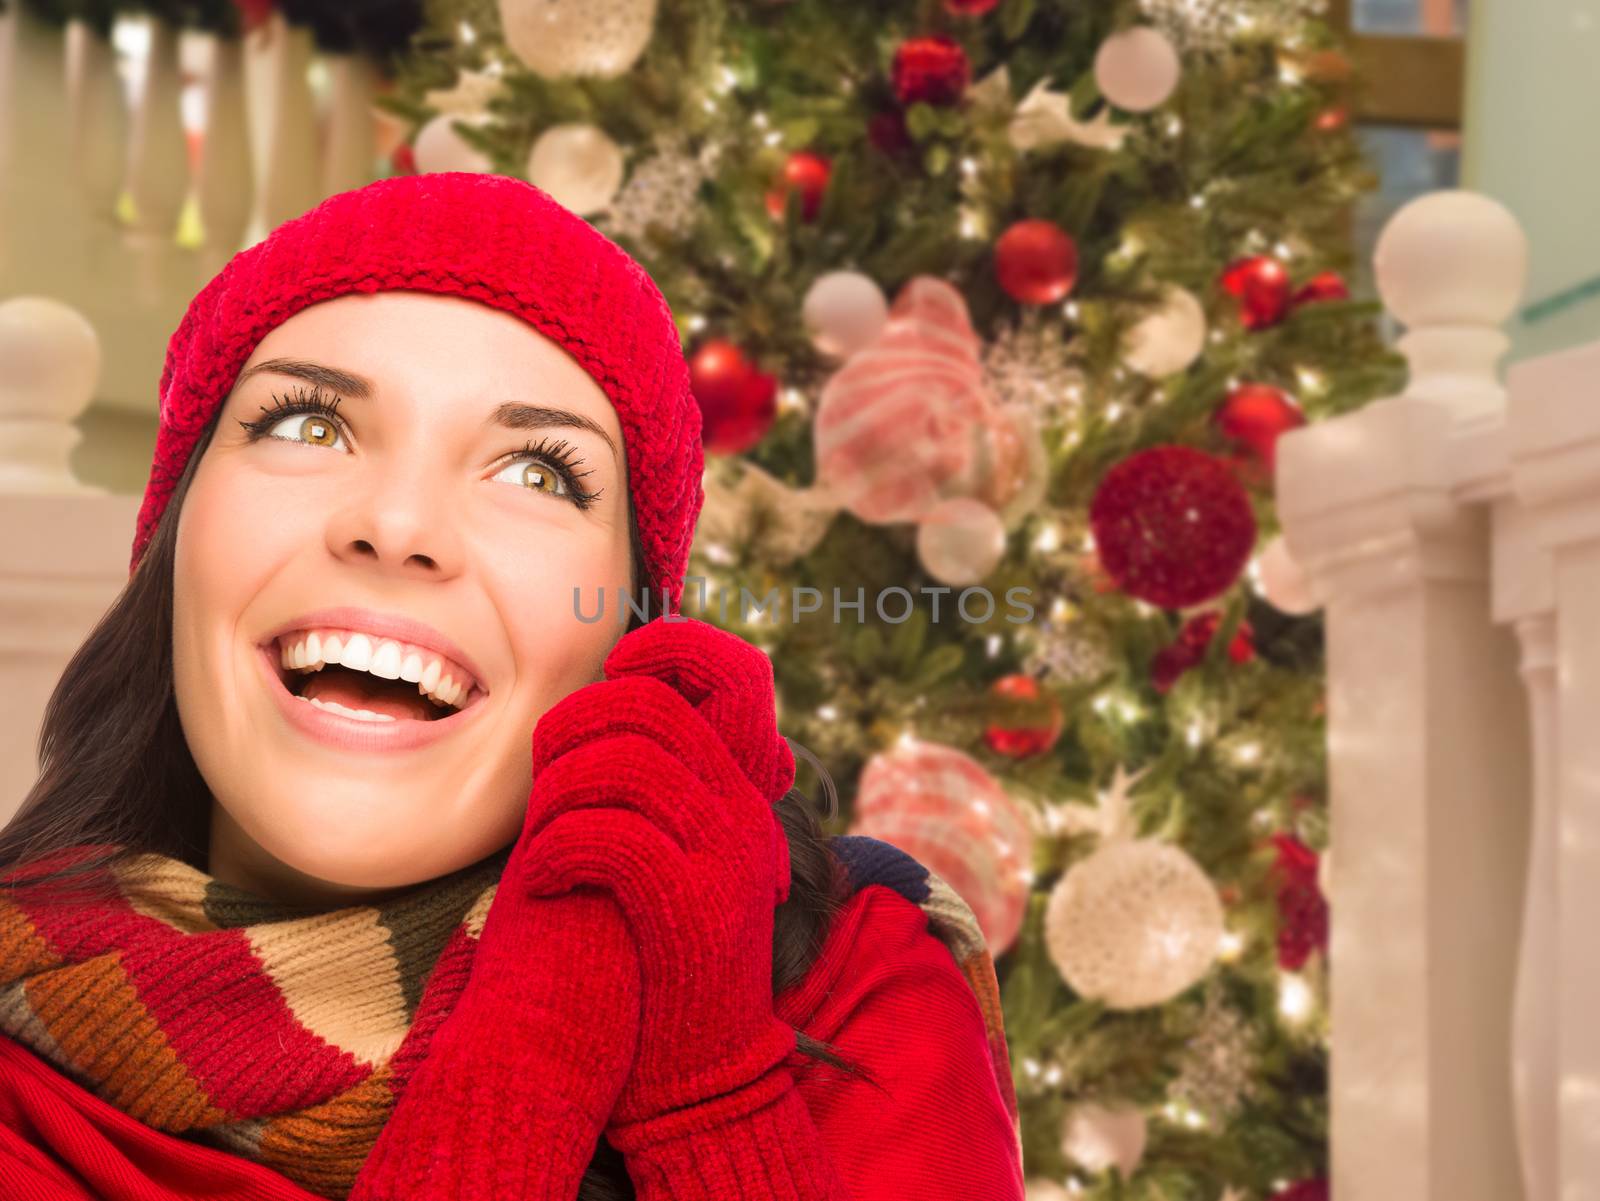 Warmly Dressed Female In Front of Decorated Christmas Tree. by Feverpitched